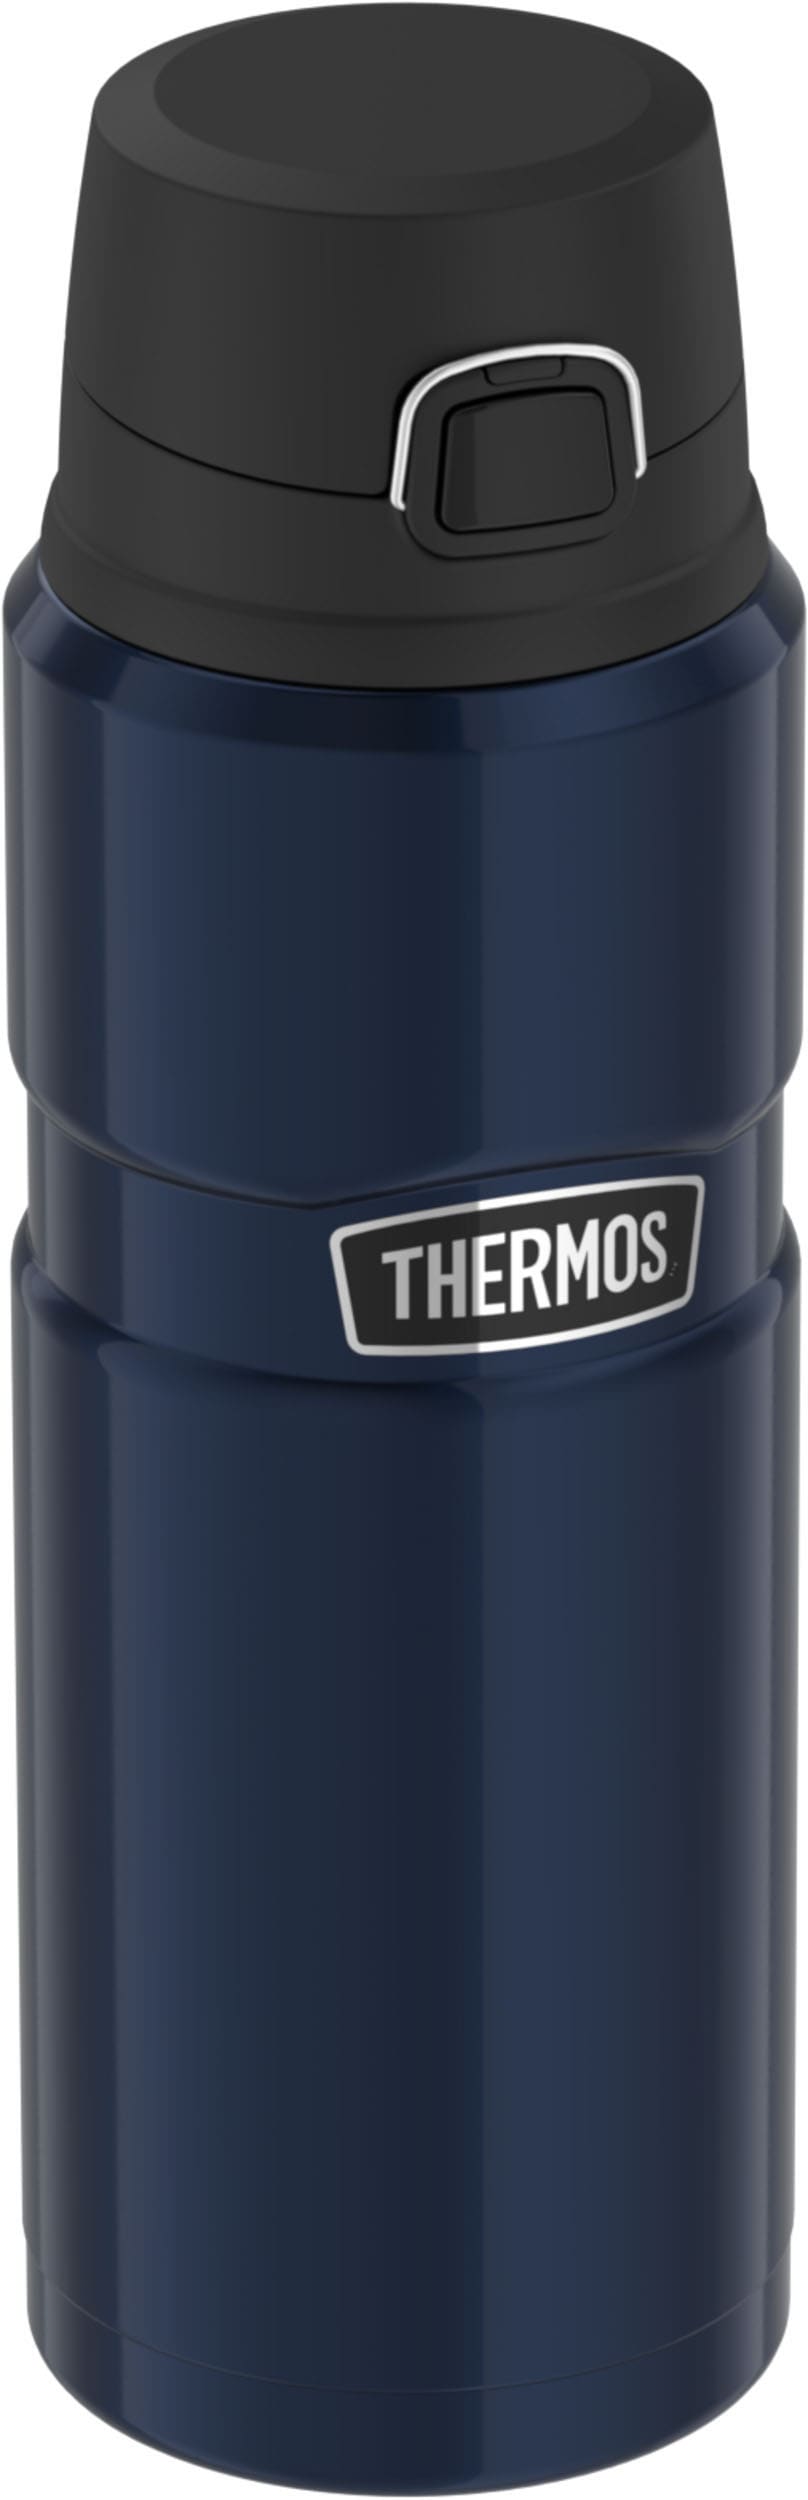 THERMOS Thermoflasche »Stainless King«, Edelstahl, 0,7 Liter